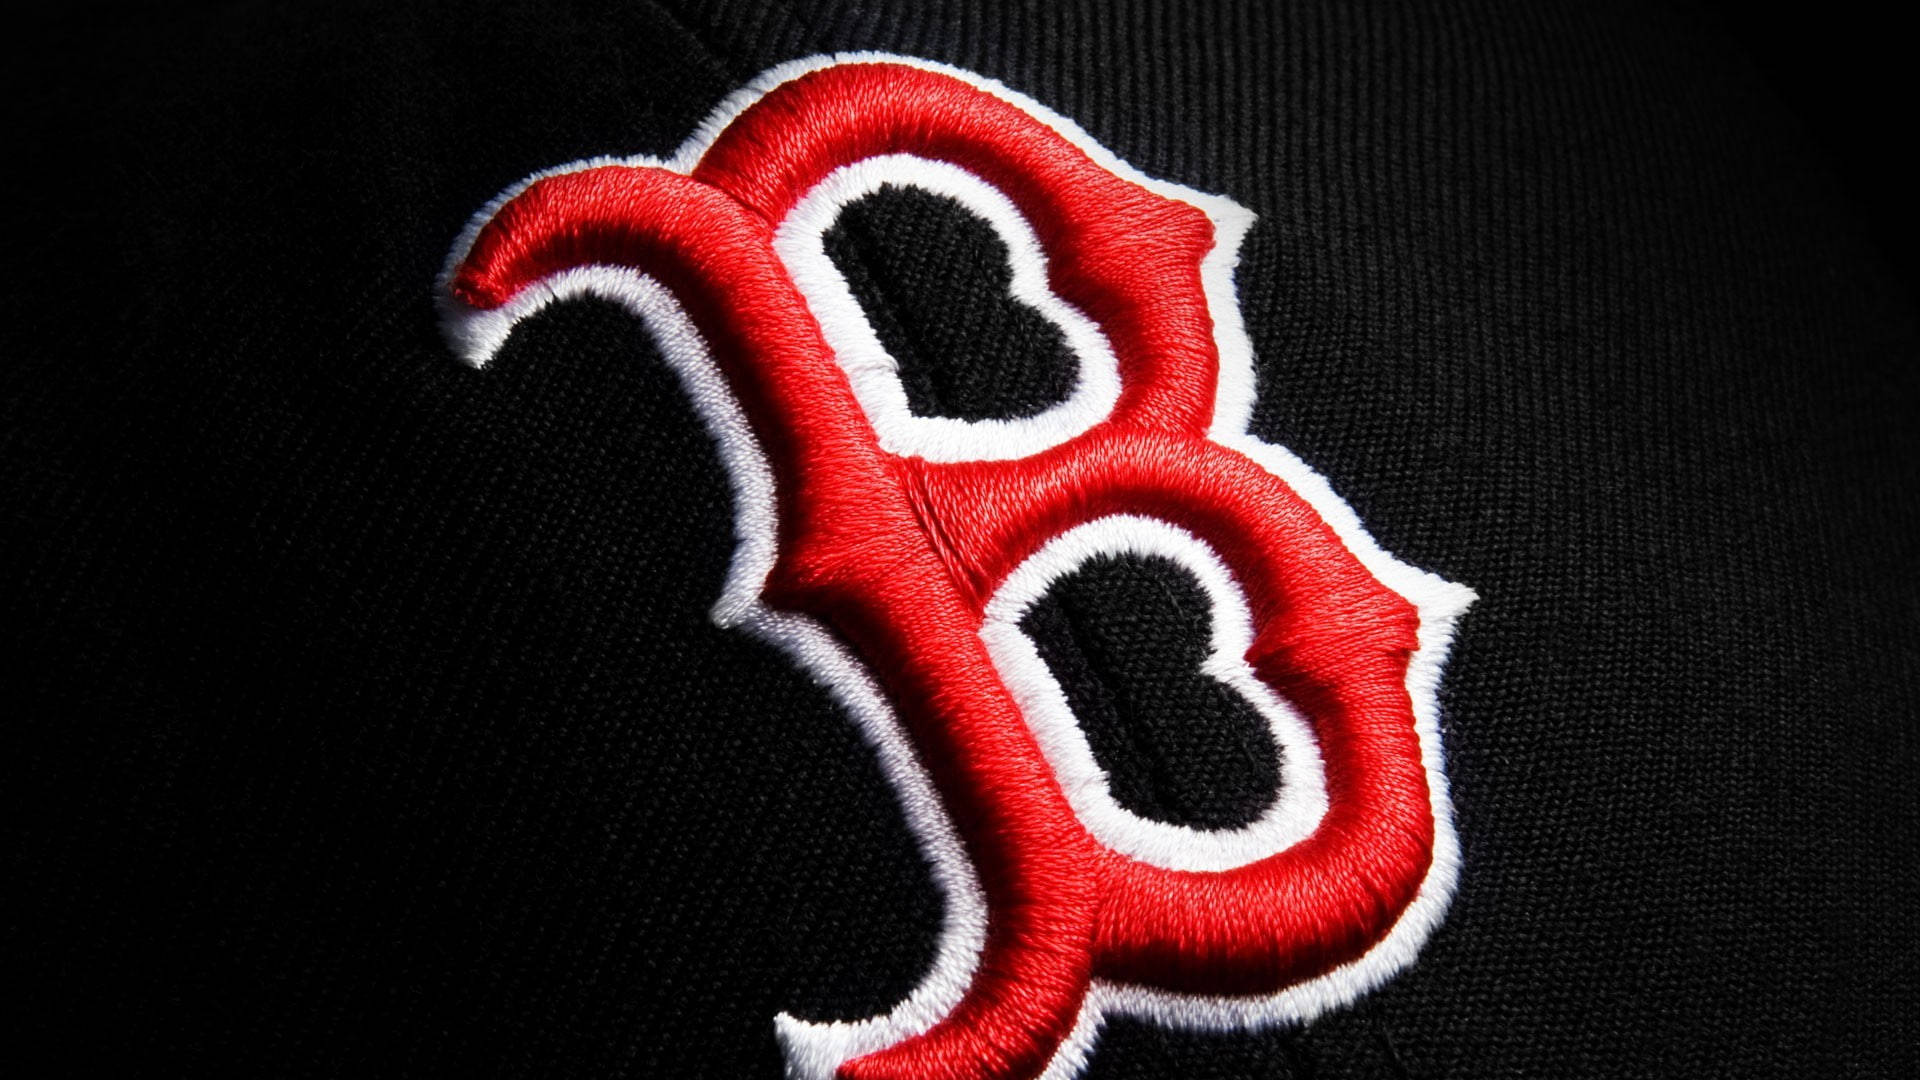 [100+] Boston Red Sox Background s for FREE | Wallpapers.com